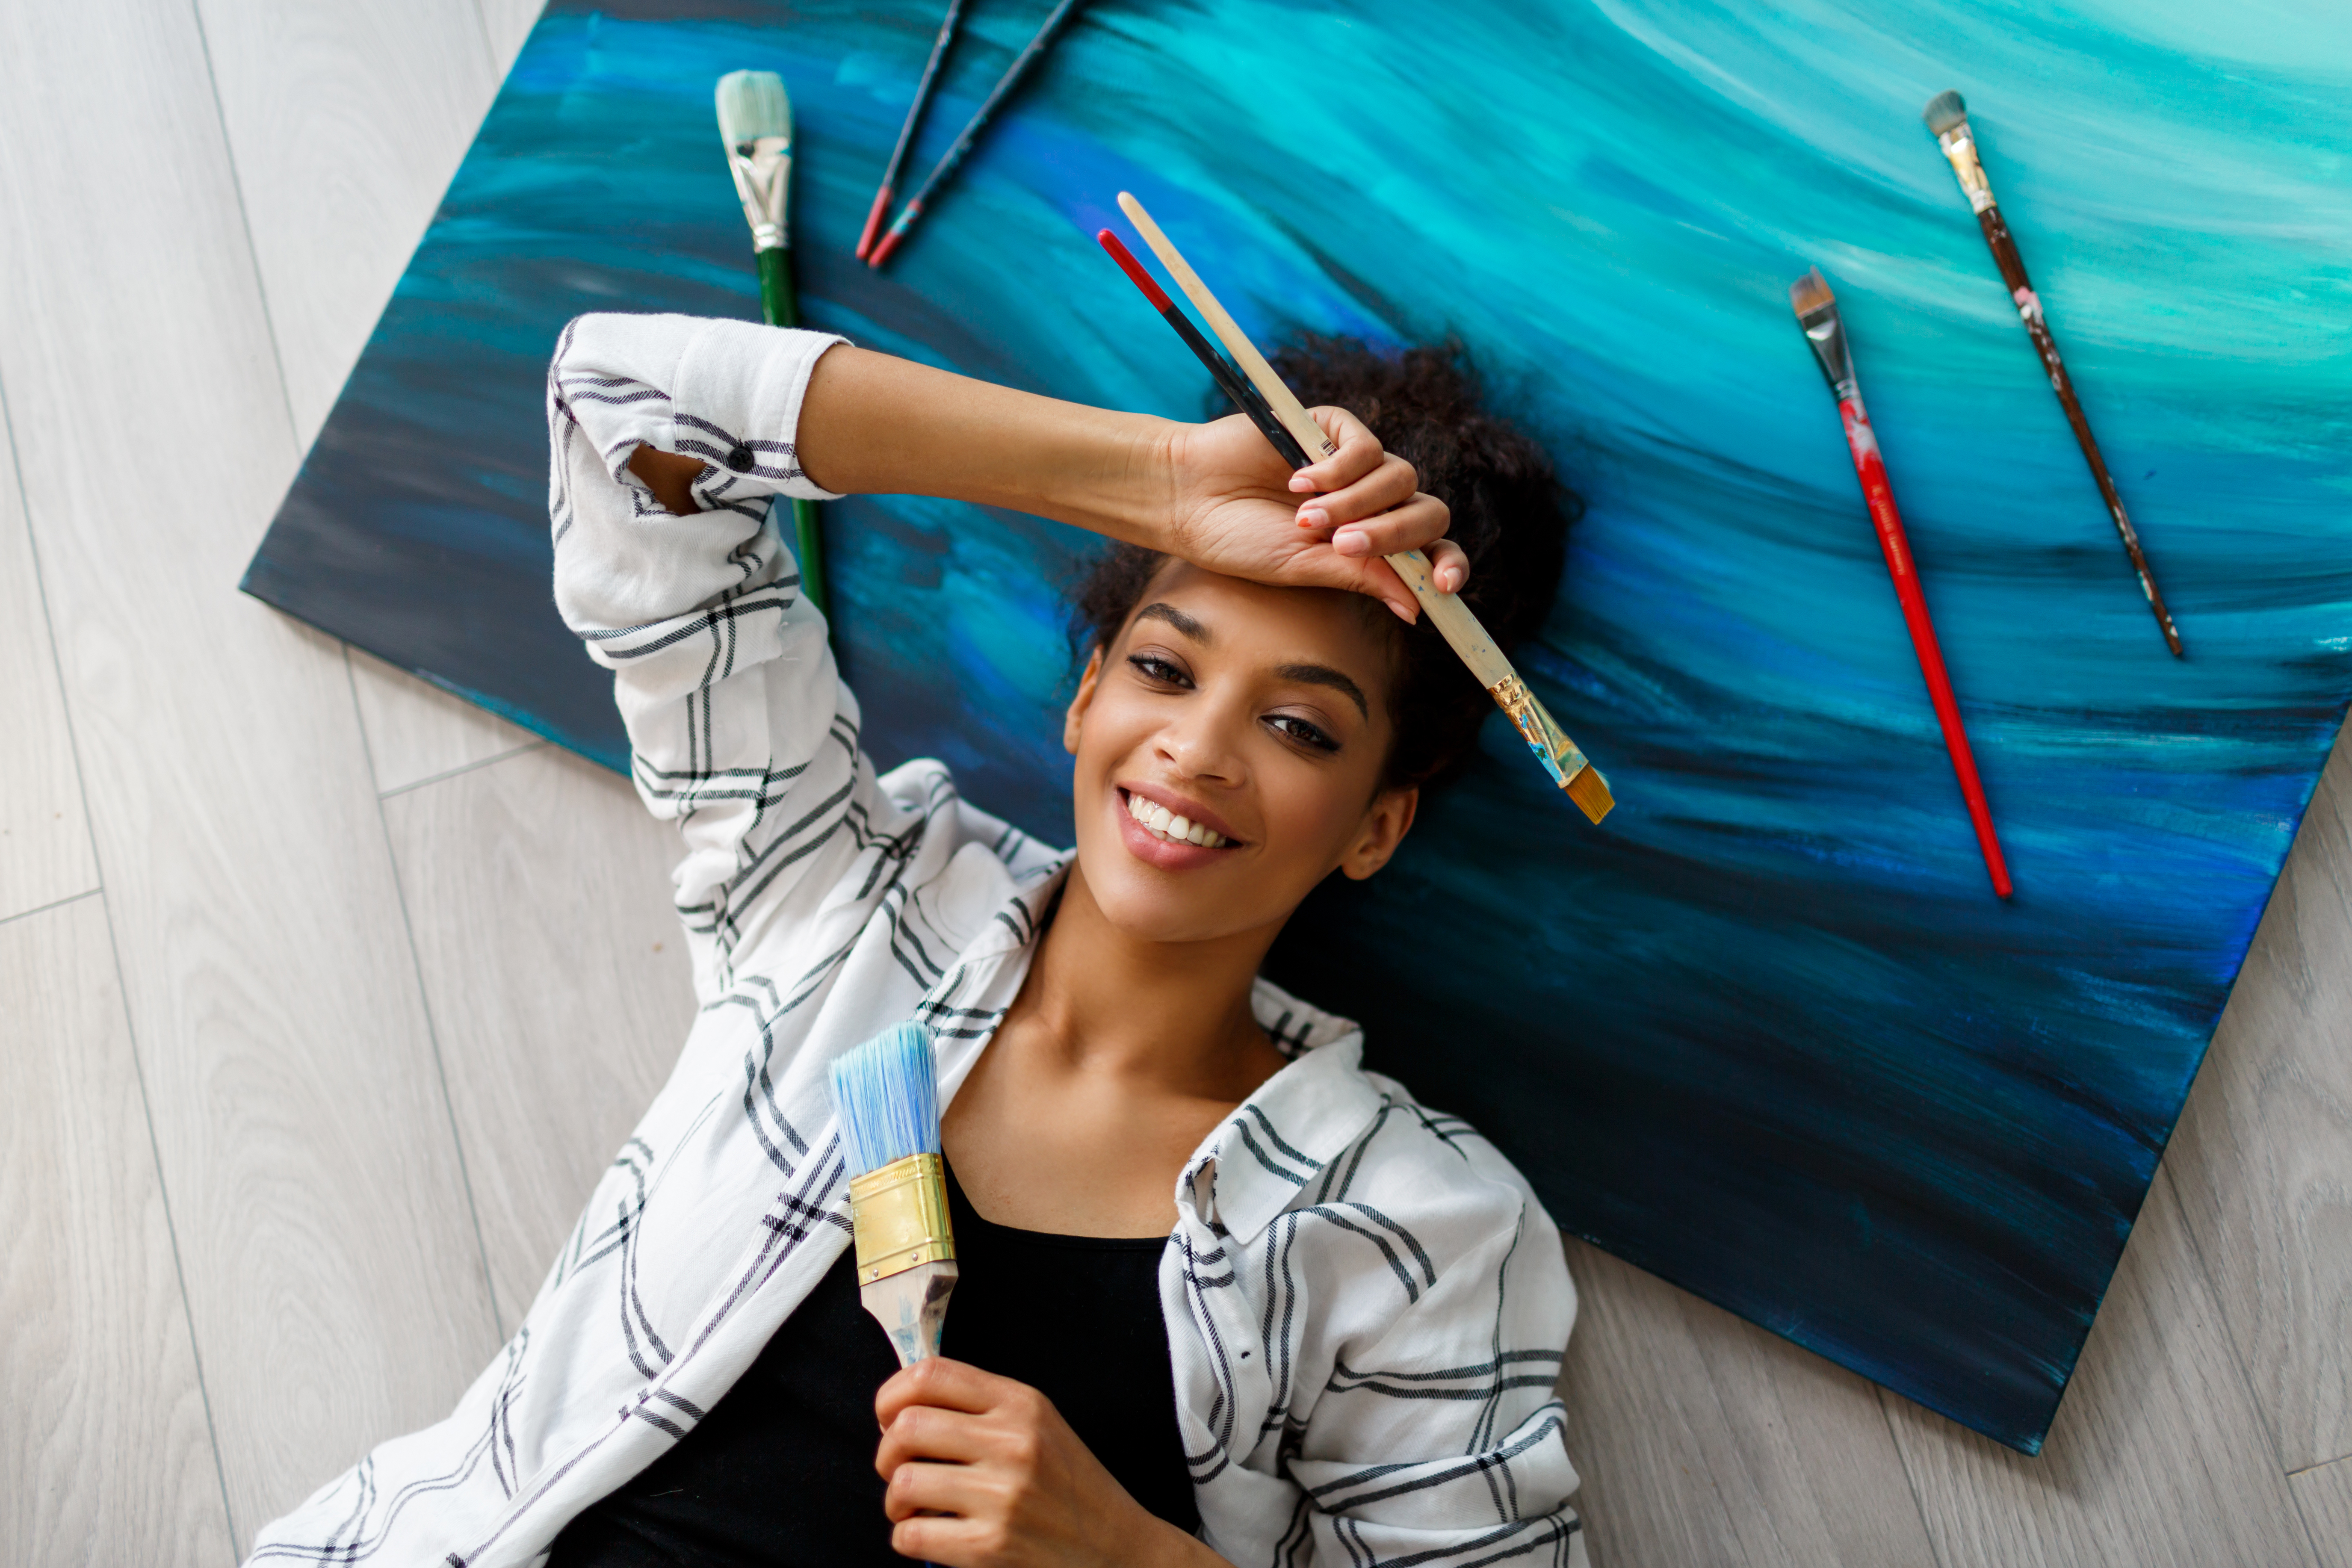 Teen Lying on a Painted Canvas